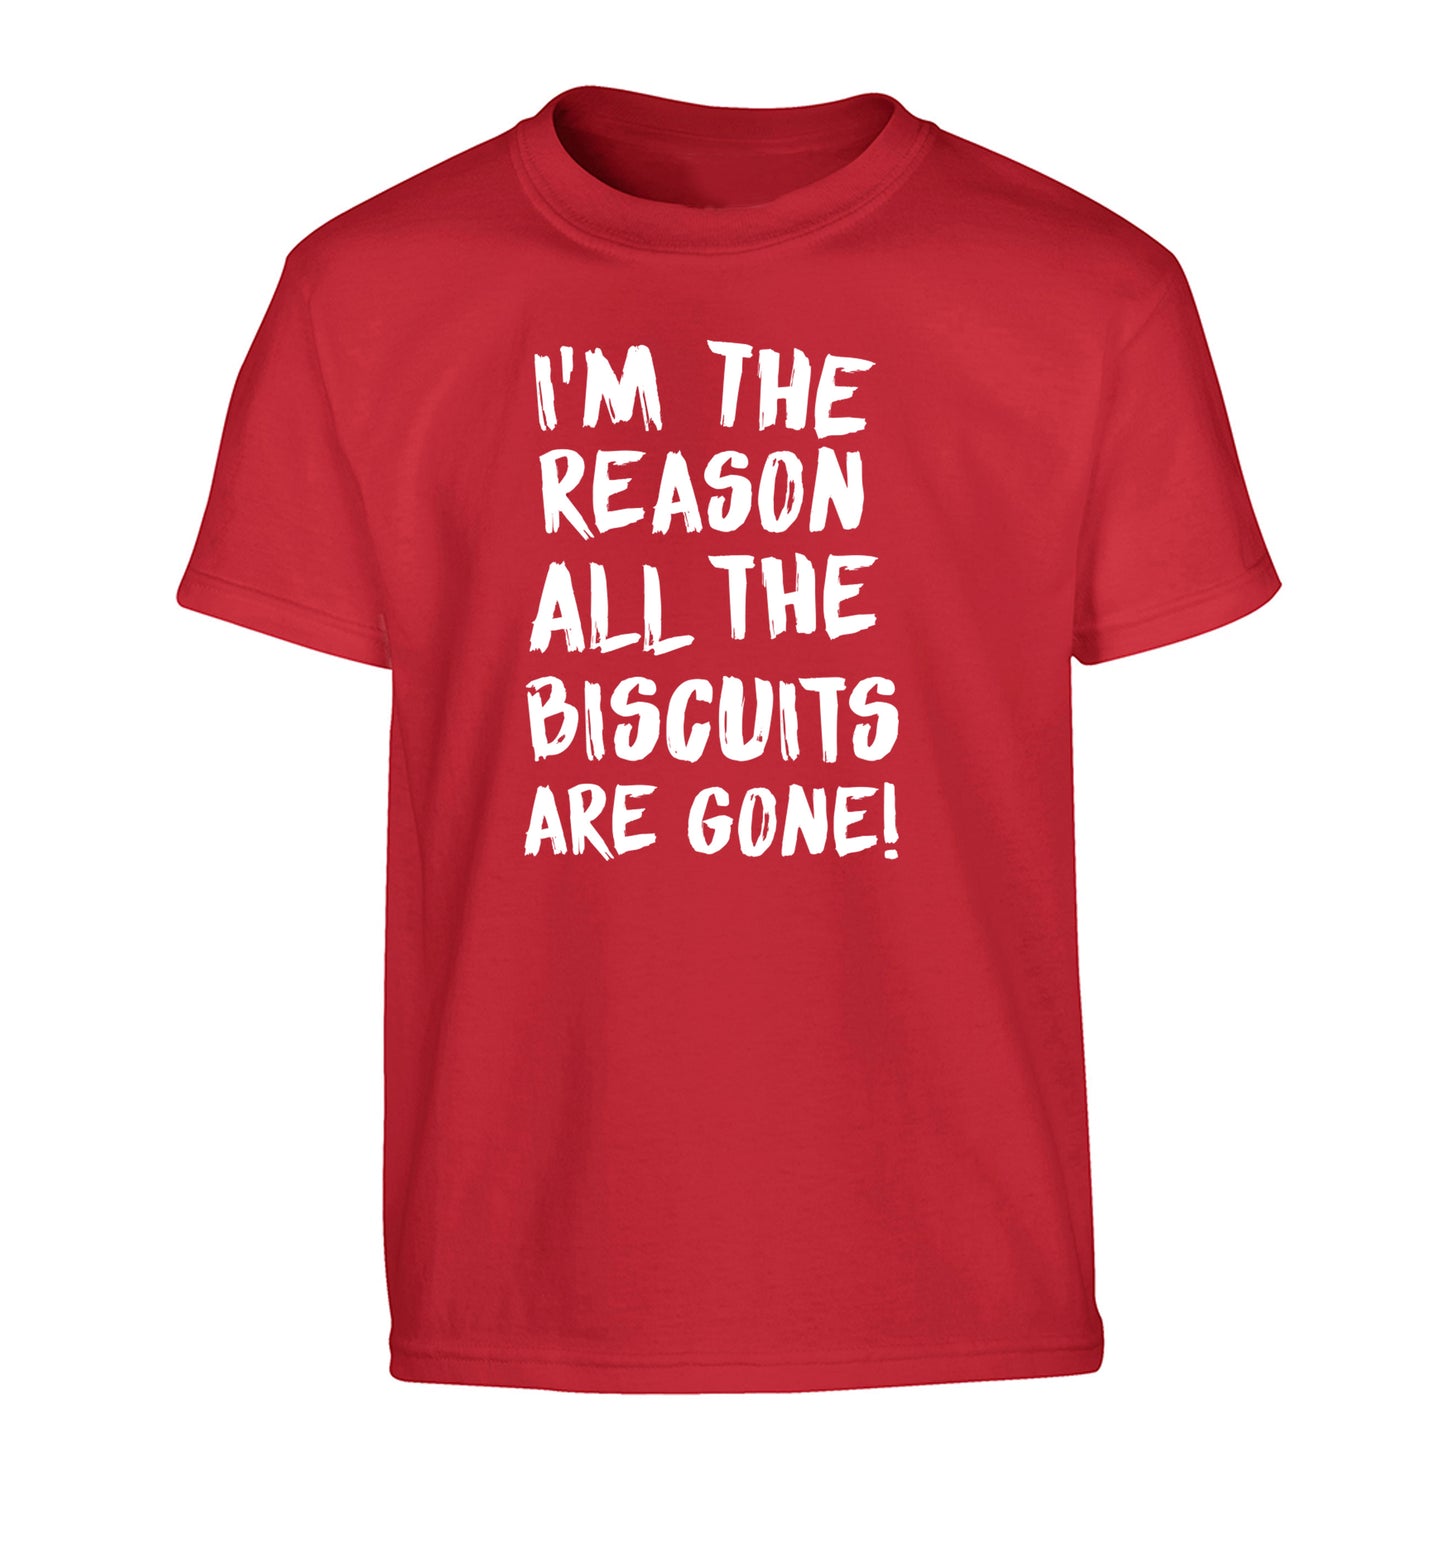 I'm the reason why all the biscuits are gone Children's red Tshirt 12-13 Years